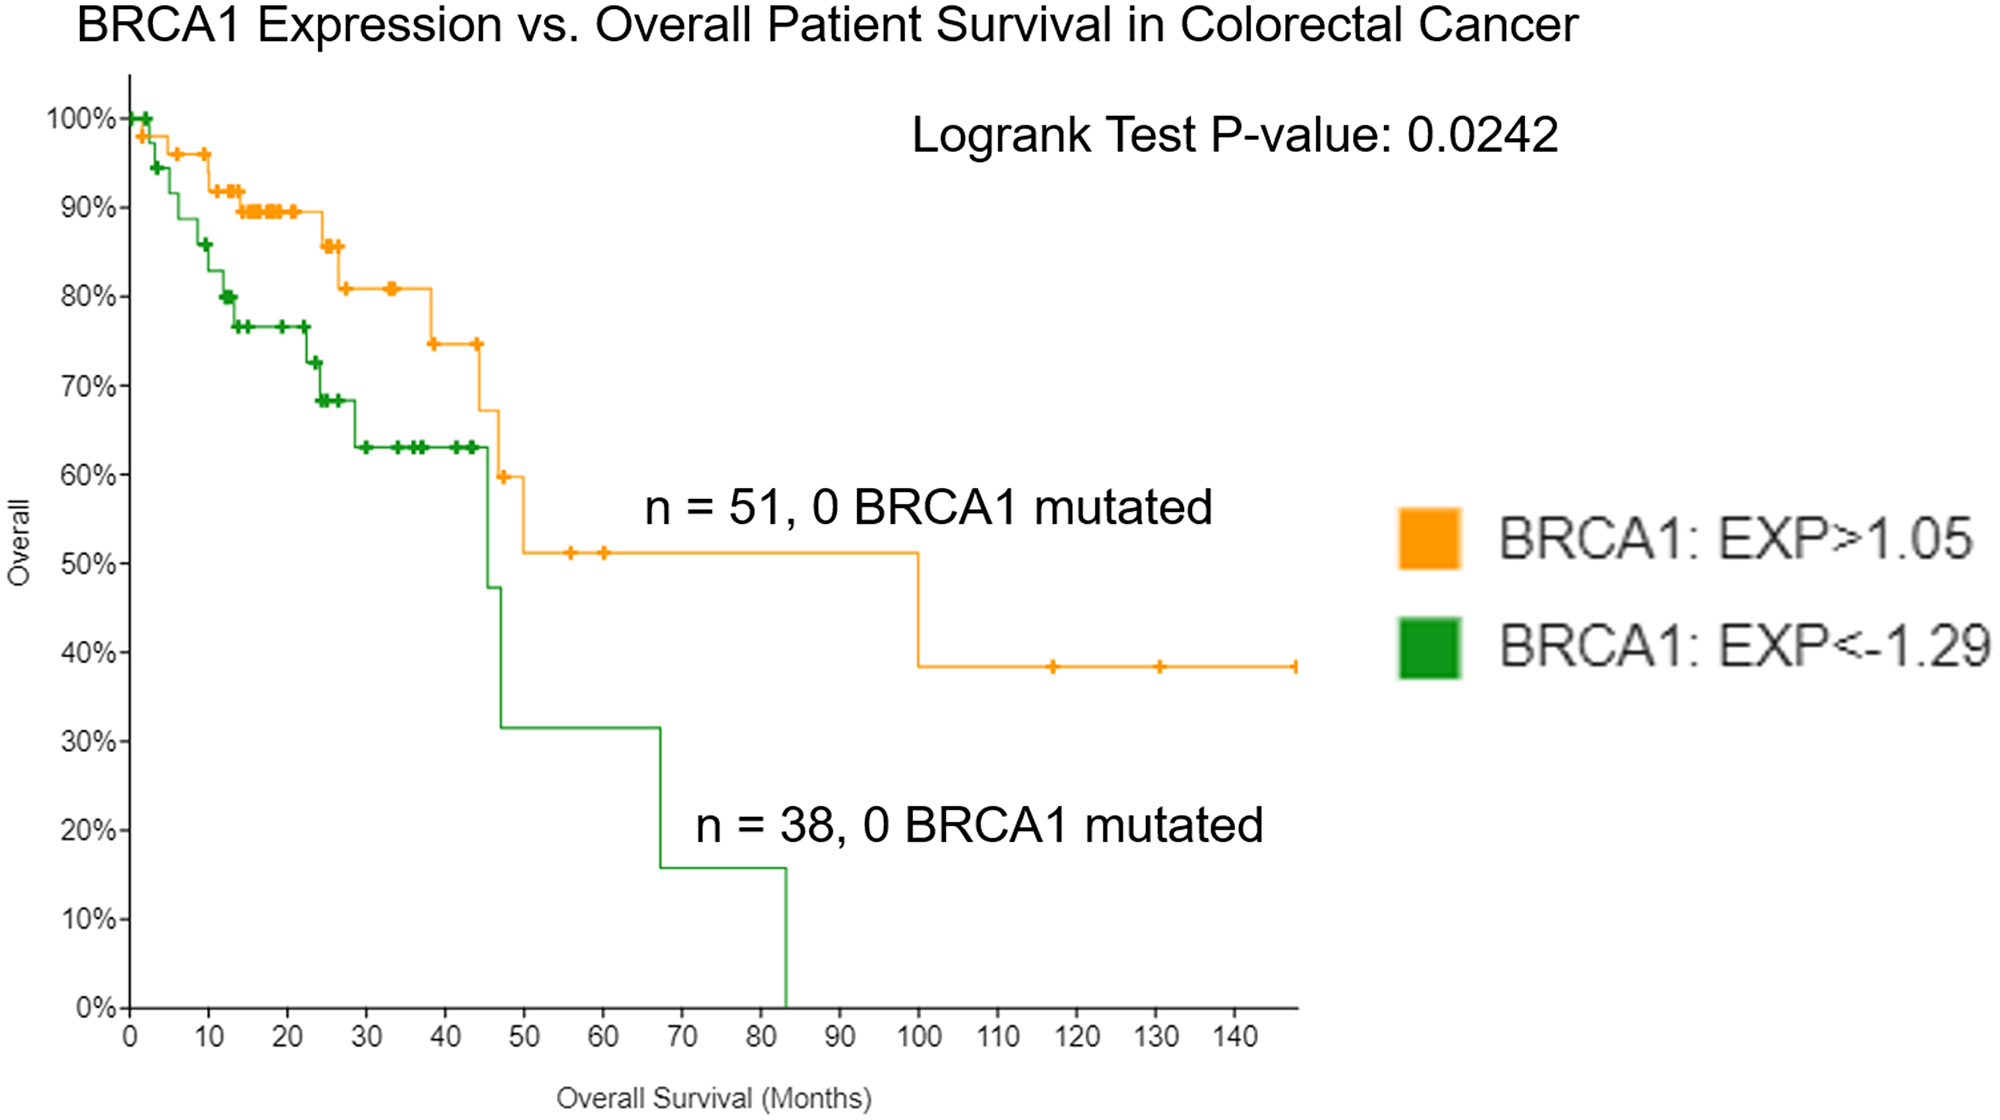 Low expression of BRCA1 in colorectal cancer correlates with worse overall survival.